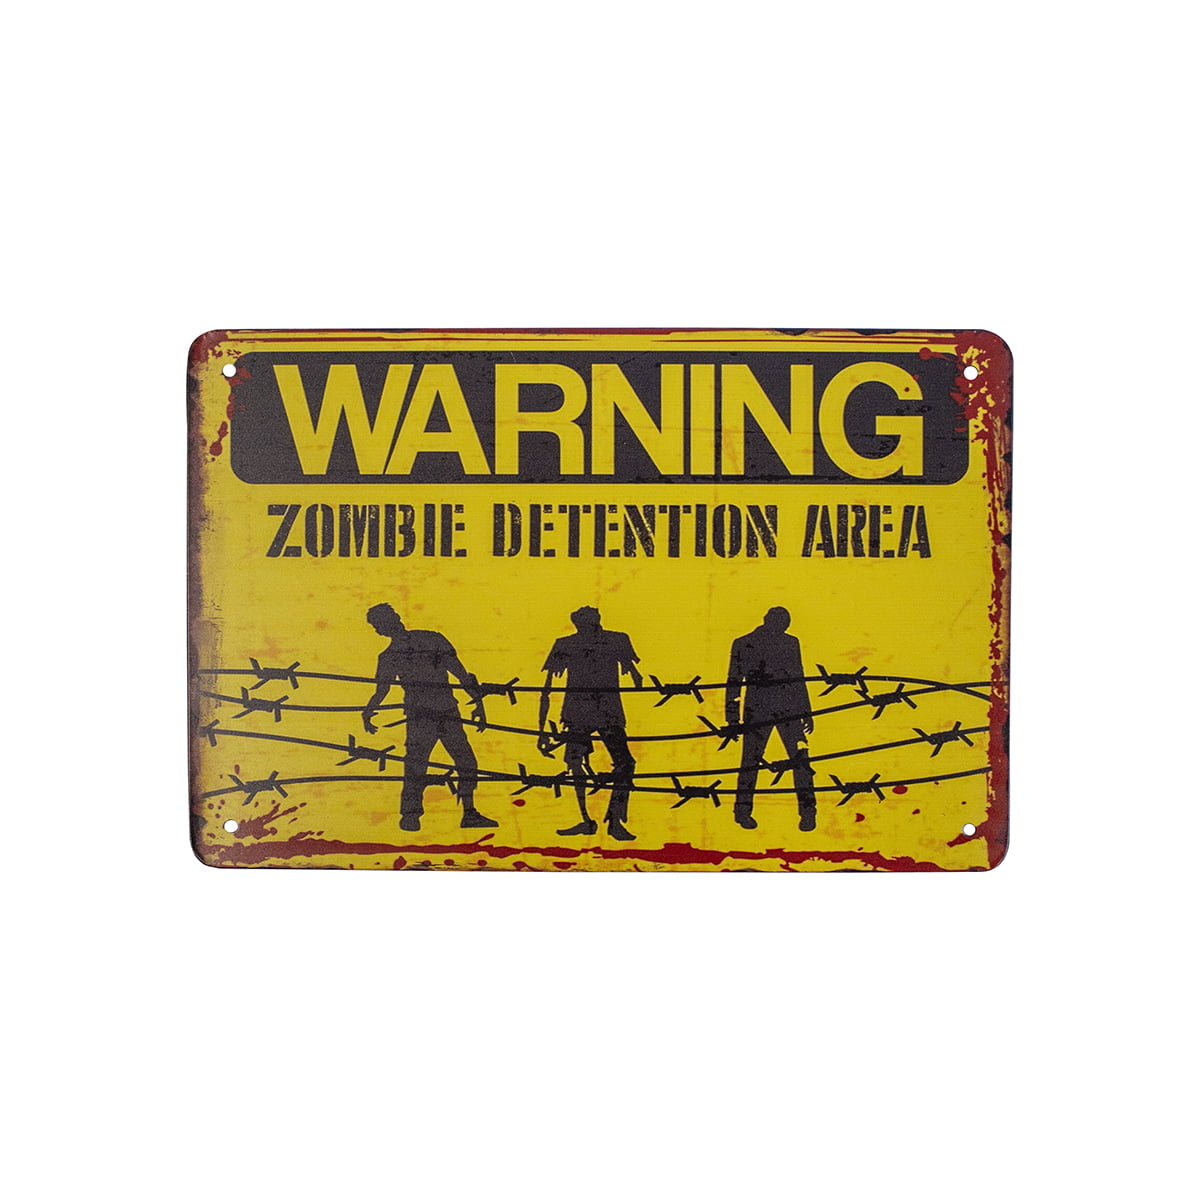 "Warning Zombies Enter At Your Own Risk" 8" x 12" metal sign MADE IN USA 